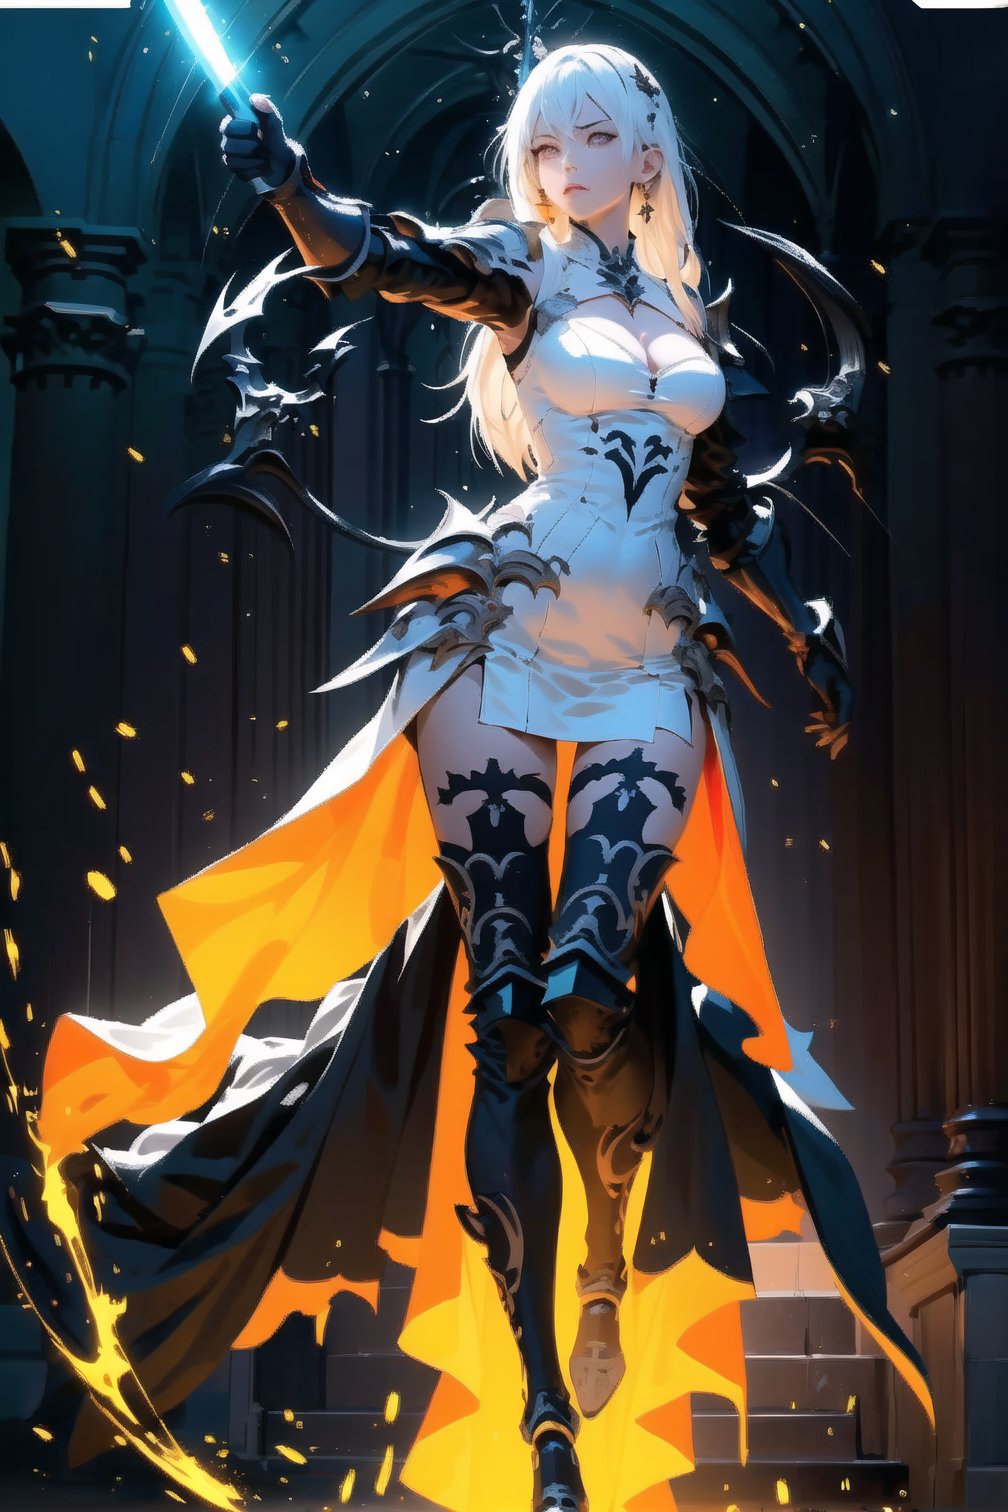 Anigame, vivid, raw, uhd, 8k, hires, 1girl, solo, full_body, cleavage, long dress, very_long_hair, 21years old, levitating, dash jumping, (floating in the air)), sharp image, ((black_full_armor)), (((pointing with blade with two hands towards alter))), ((glowing blade)), lava, soul, demon, death, knight, fights monsters, bright_light, dark_light, action side view, active, queen, supernatural, beauty, sexy, random background, neon lights, (fit in the frame)dynamic_angle, large_breasts, dynamic_lighting, dynamic_action, cleavage, (dynamic pose), ((see_through)), string, minimal fabric ,clothes_tearing, dynamic effects, water, magic, thigh_gap, slim_body, slim_thigh, sorcerer ,Anigame ,pastelbg, legs_open, detailed_face, impossible_fit, fit_in_frame, full_body, sfw, facing_viewer,side_view,highres,More Detail, UHD,High detailed ,Color Booster,realistic,girl, pastelbg, beautiful_background, ((in the holy cathedral)),perfect light